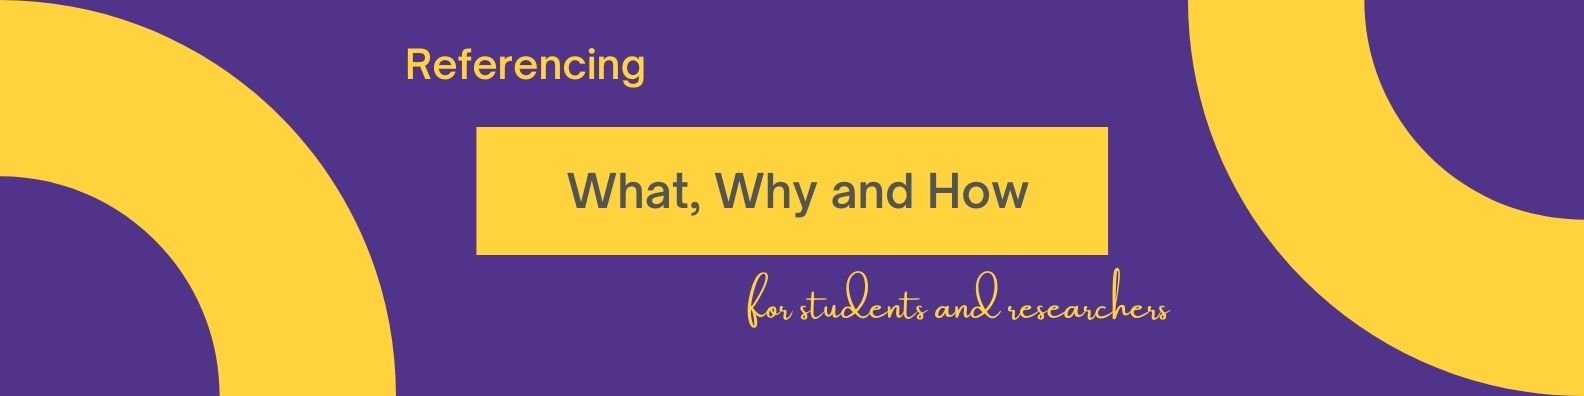 Referencing - What Why and How